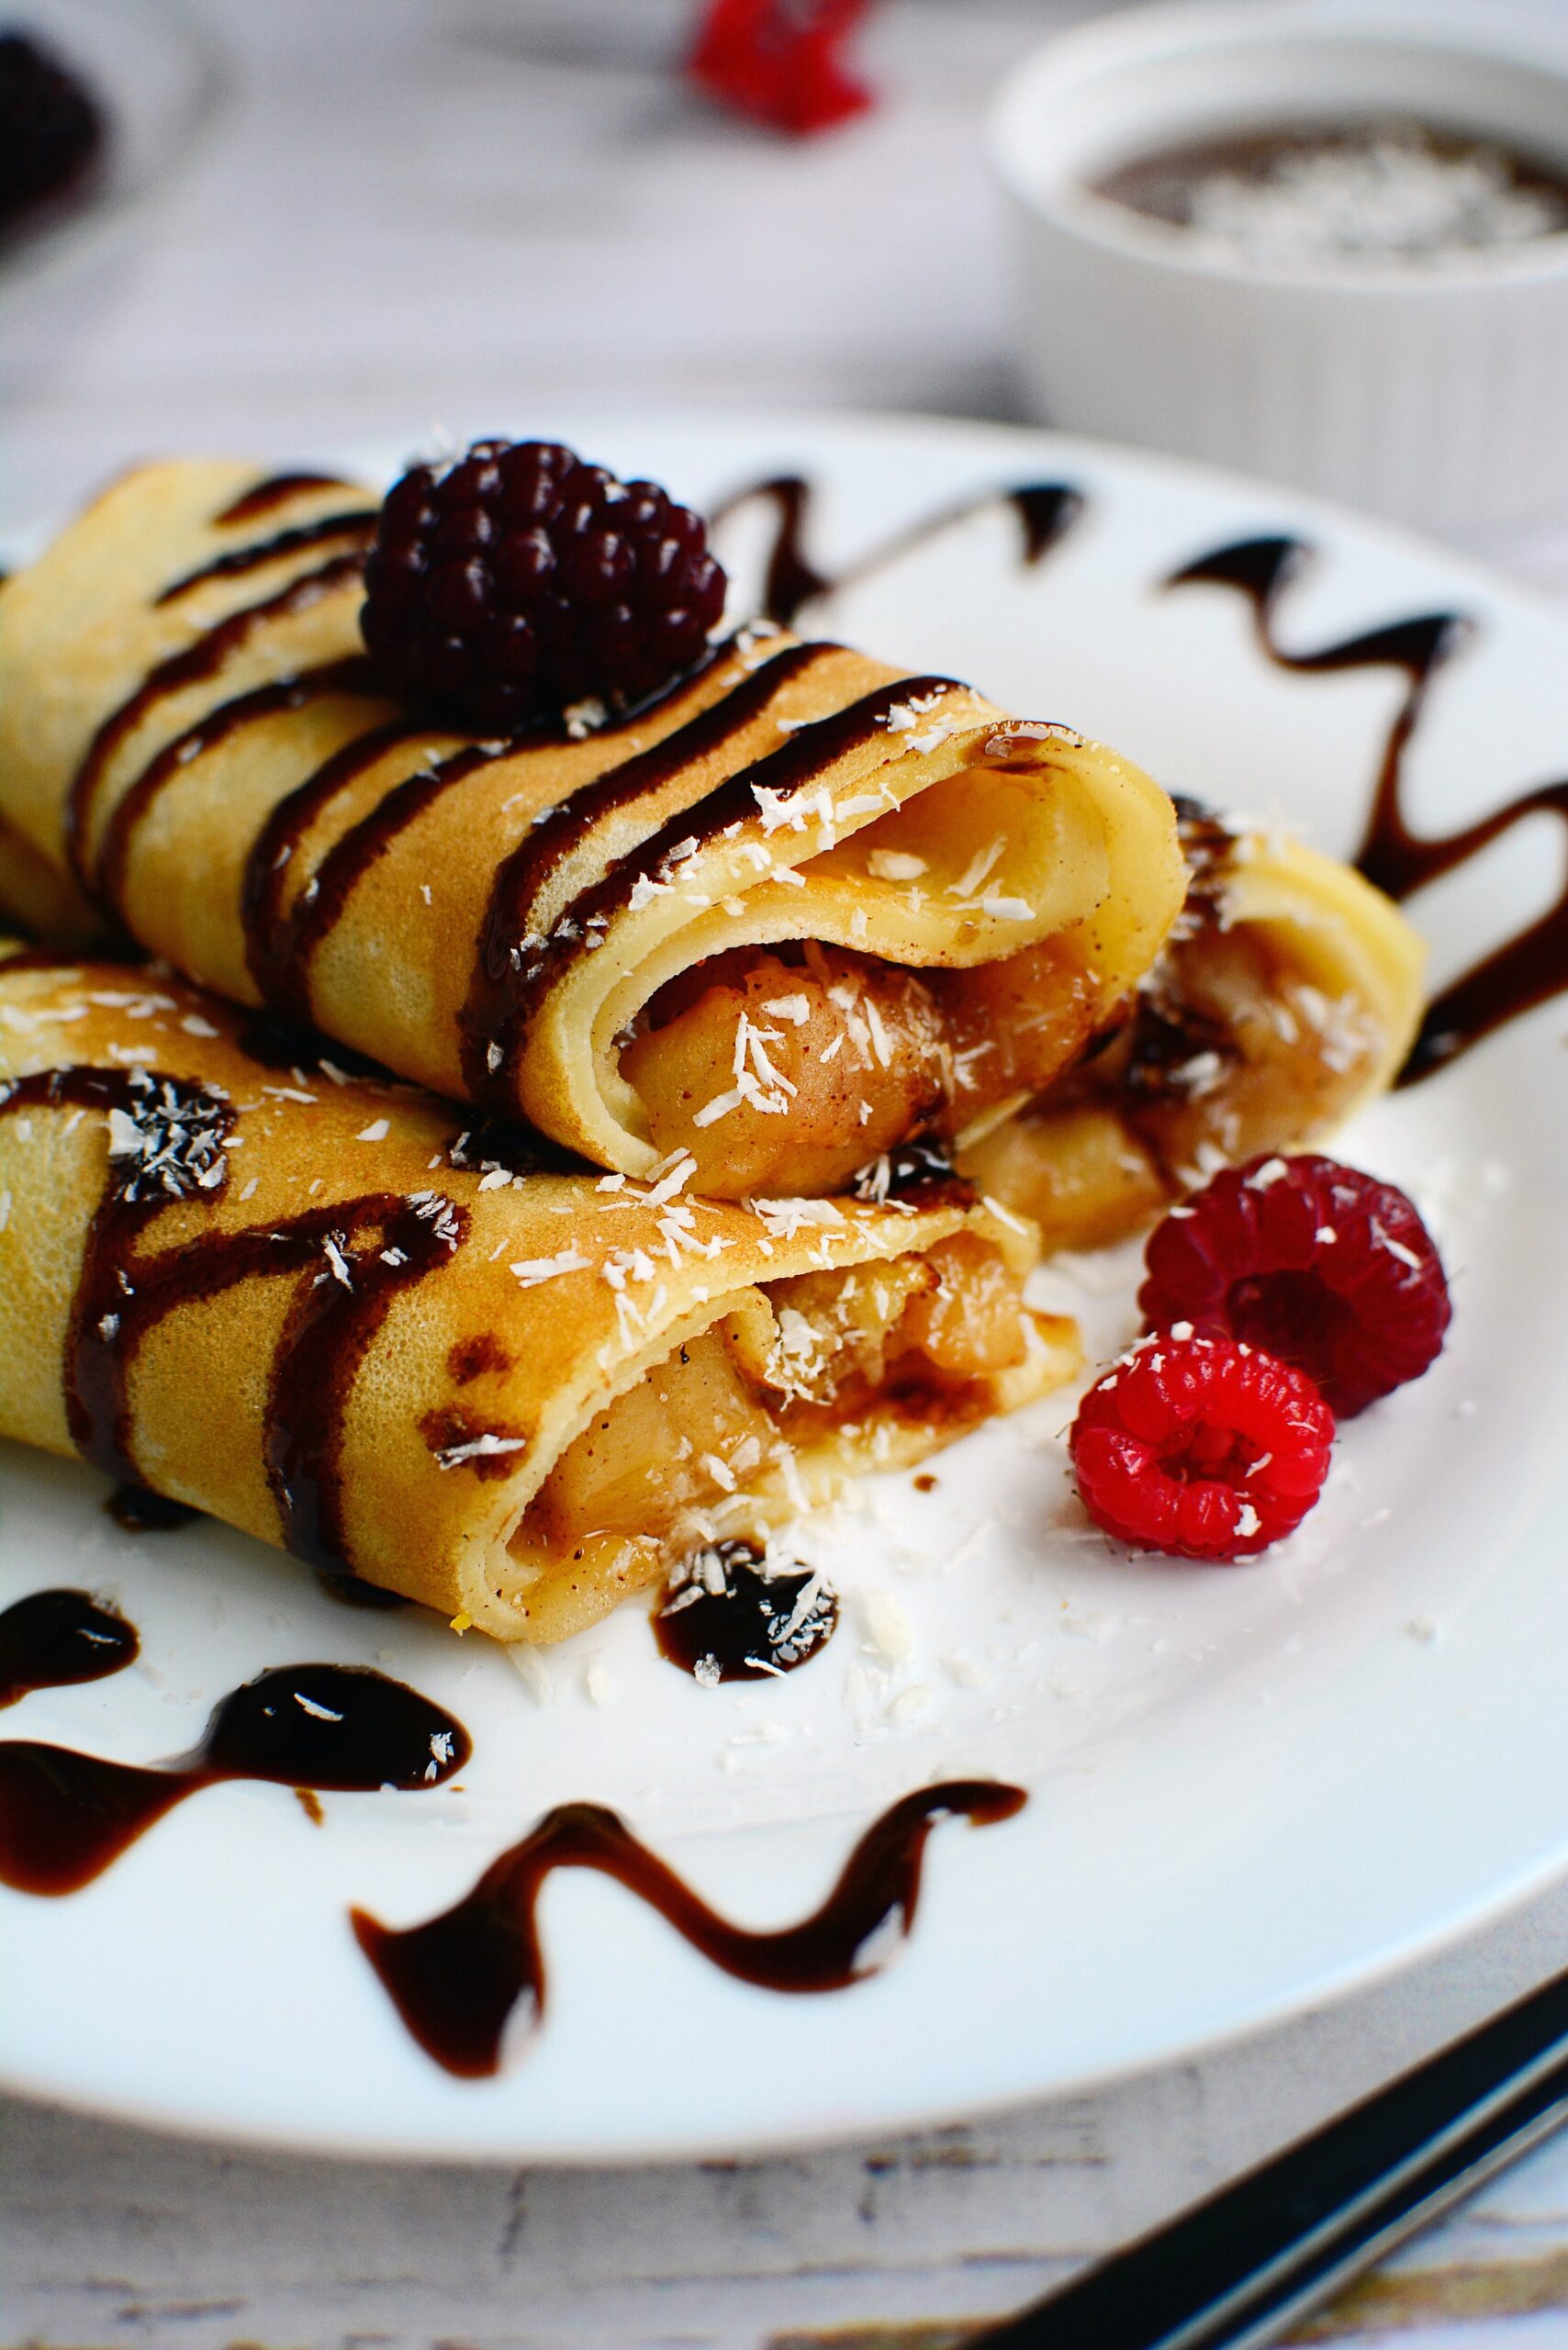 Peanut butter and fruit jam blintzes with rasberry and blackberry garnish sprinkled with cococunt or powdered sugar flakes on a white plate further garnished with swirls of chocolate syrup.